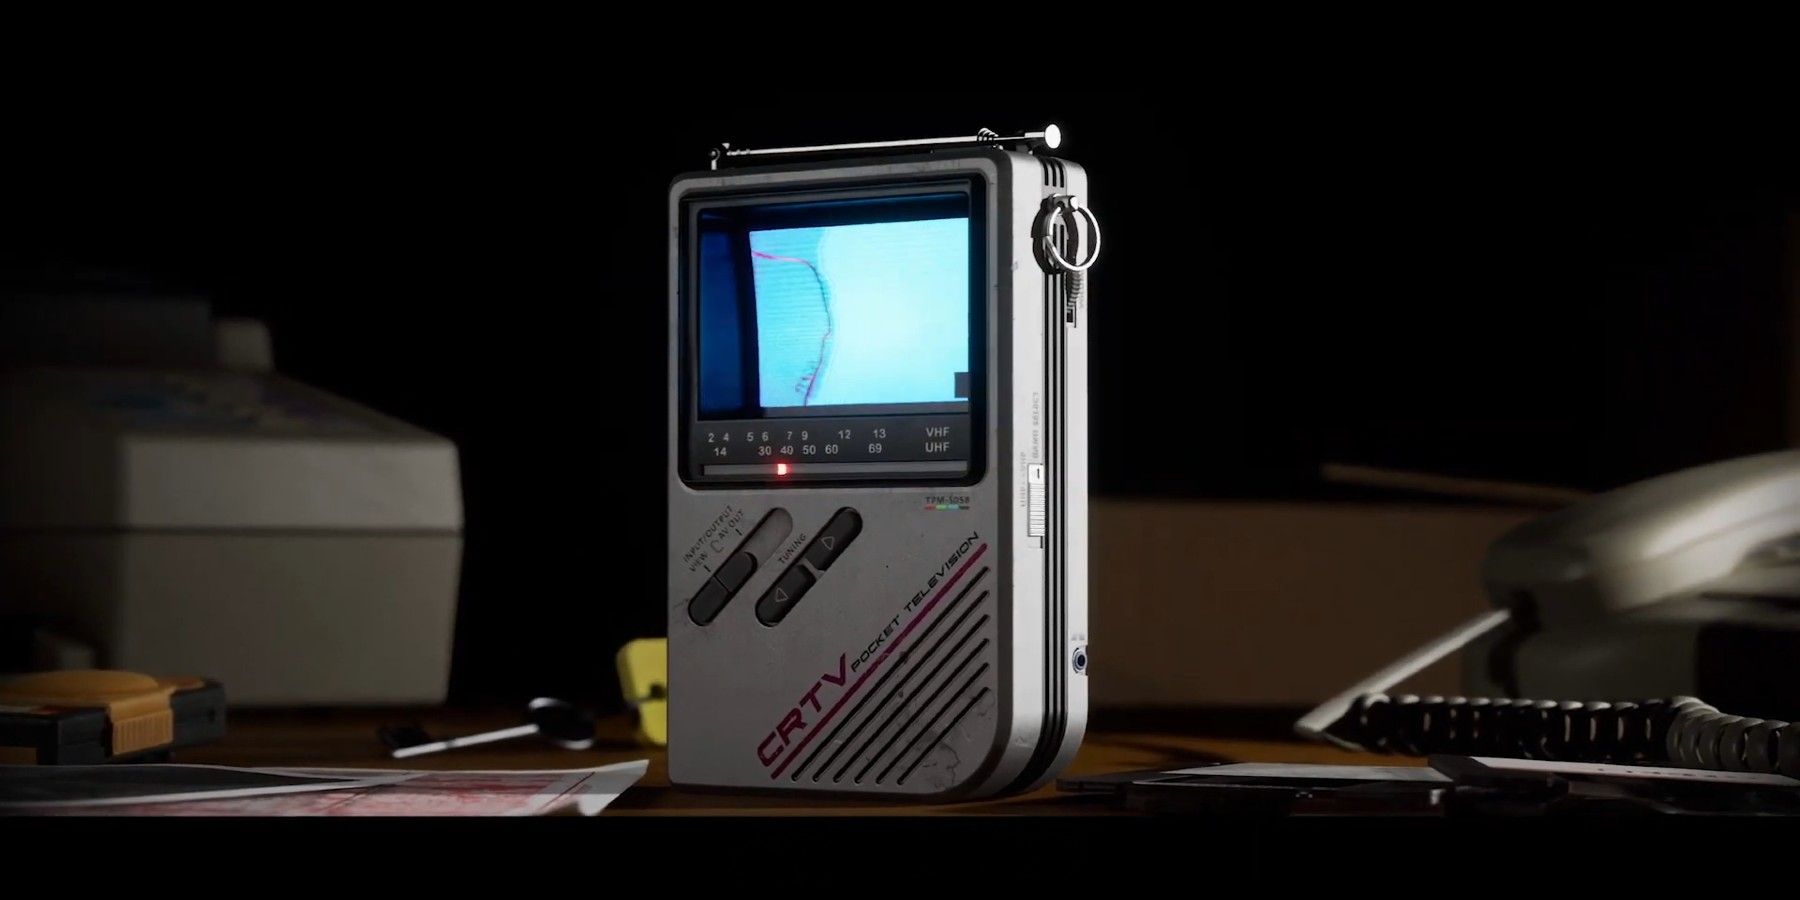 The retro radio from Silent Hill Townfall's teaser trailer.